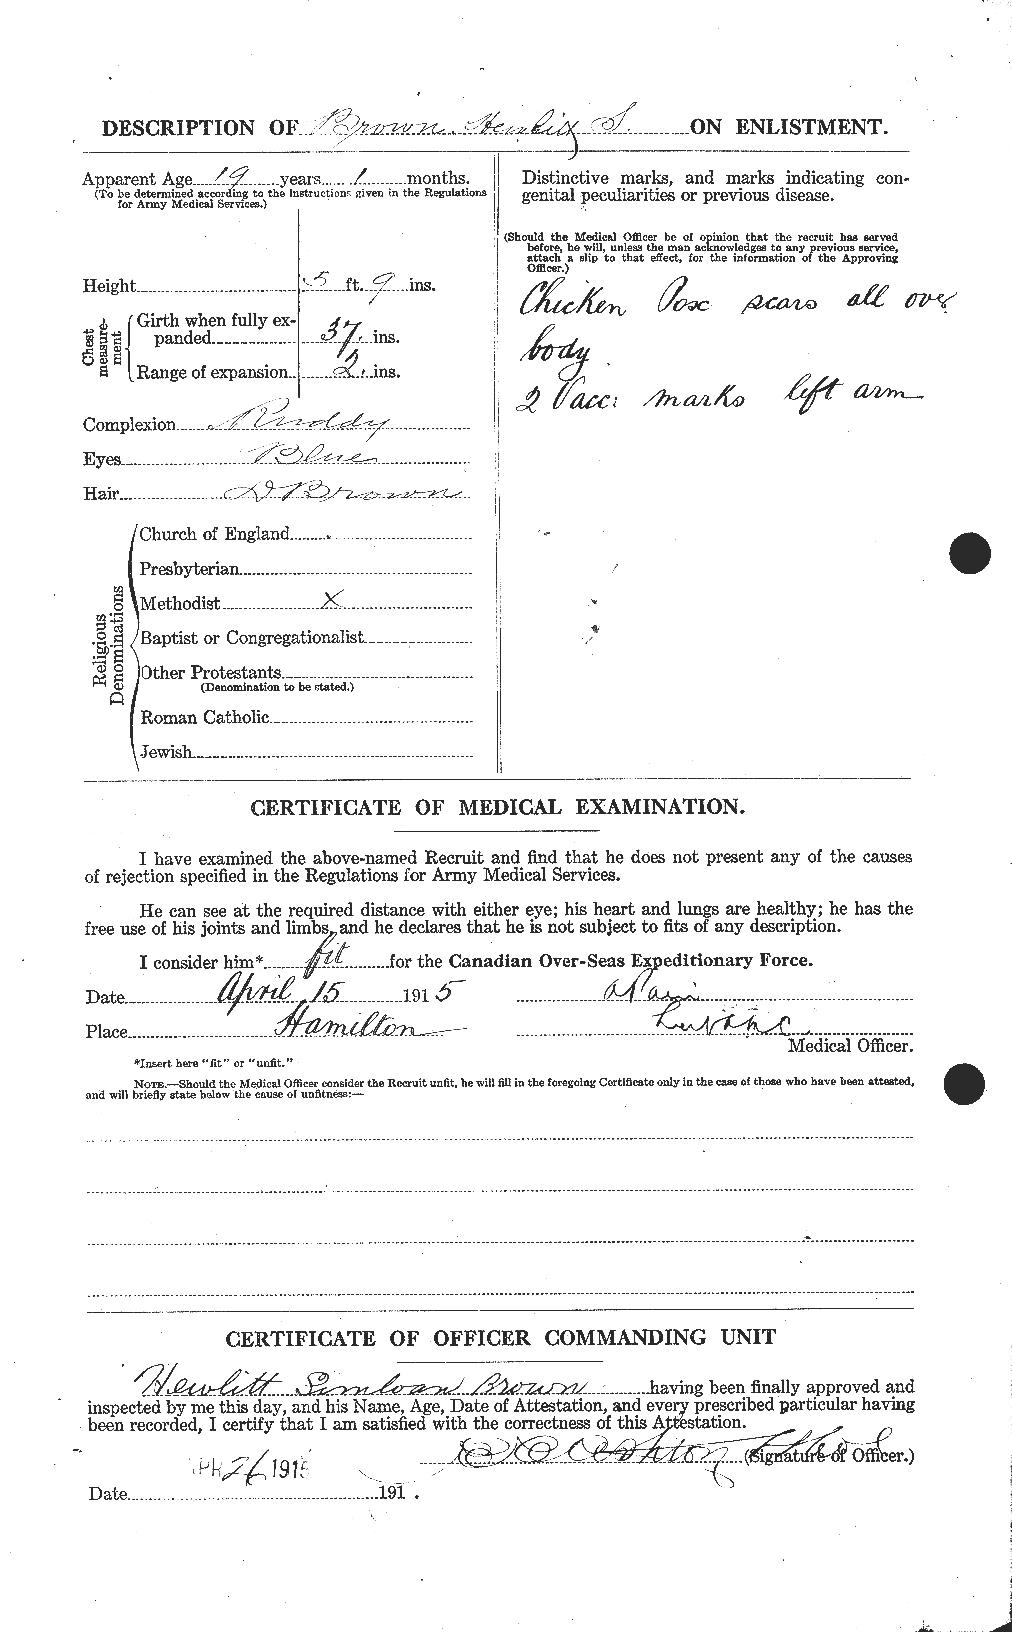 Personnel Records of the First World War - CEF 265599b